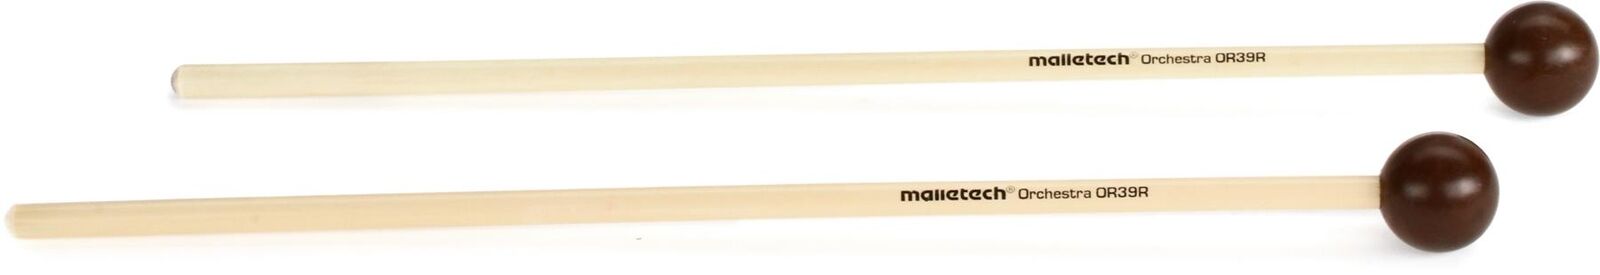 Malletech OR39R Orchestral Series Xylophone Mallets - Brown (3-pack) Bundle